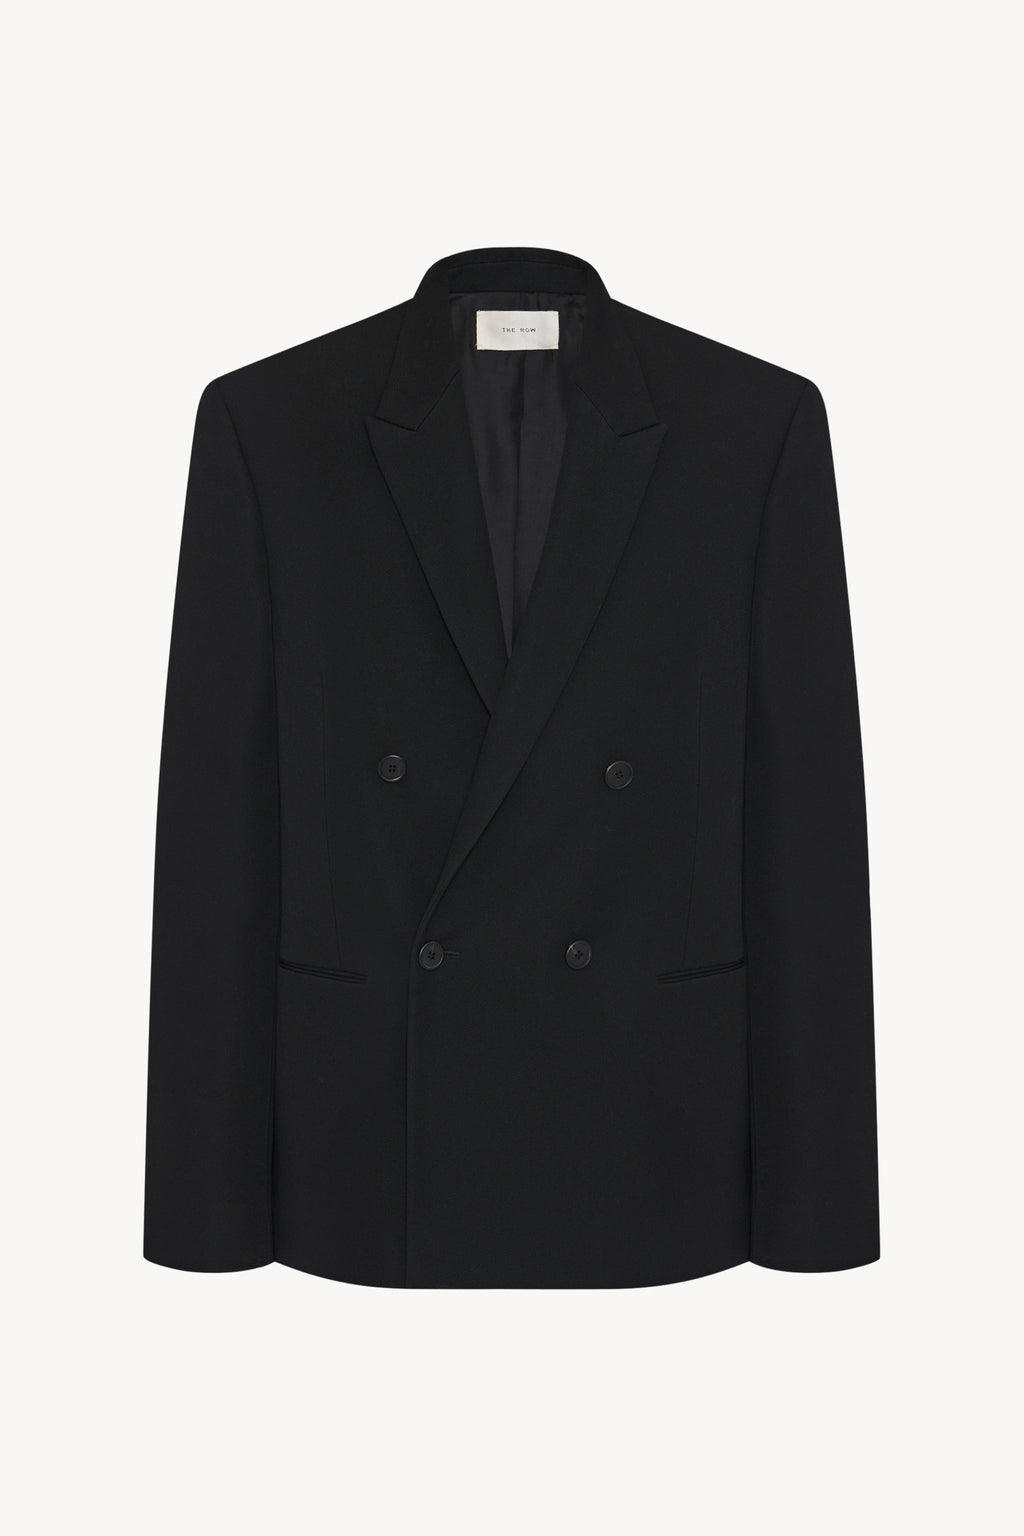 Wilson Jacket Black in Cotton – The Row